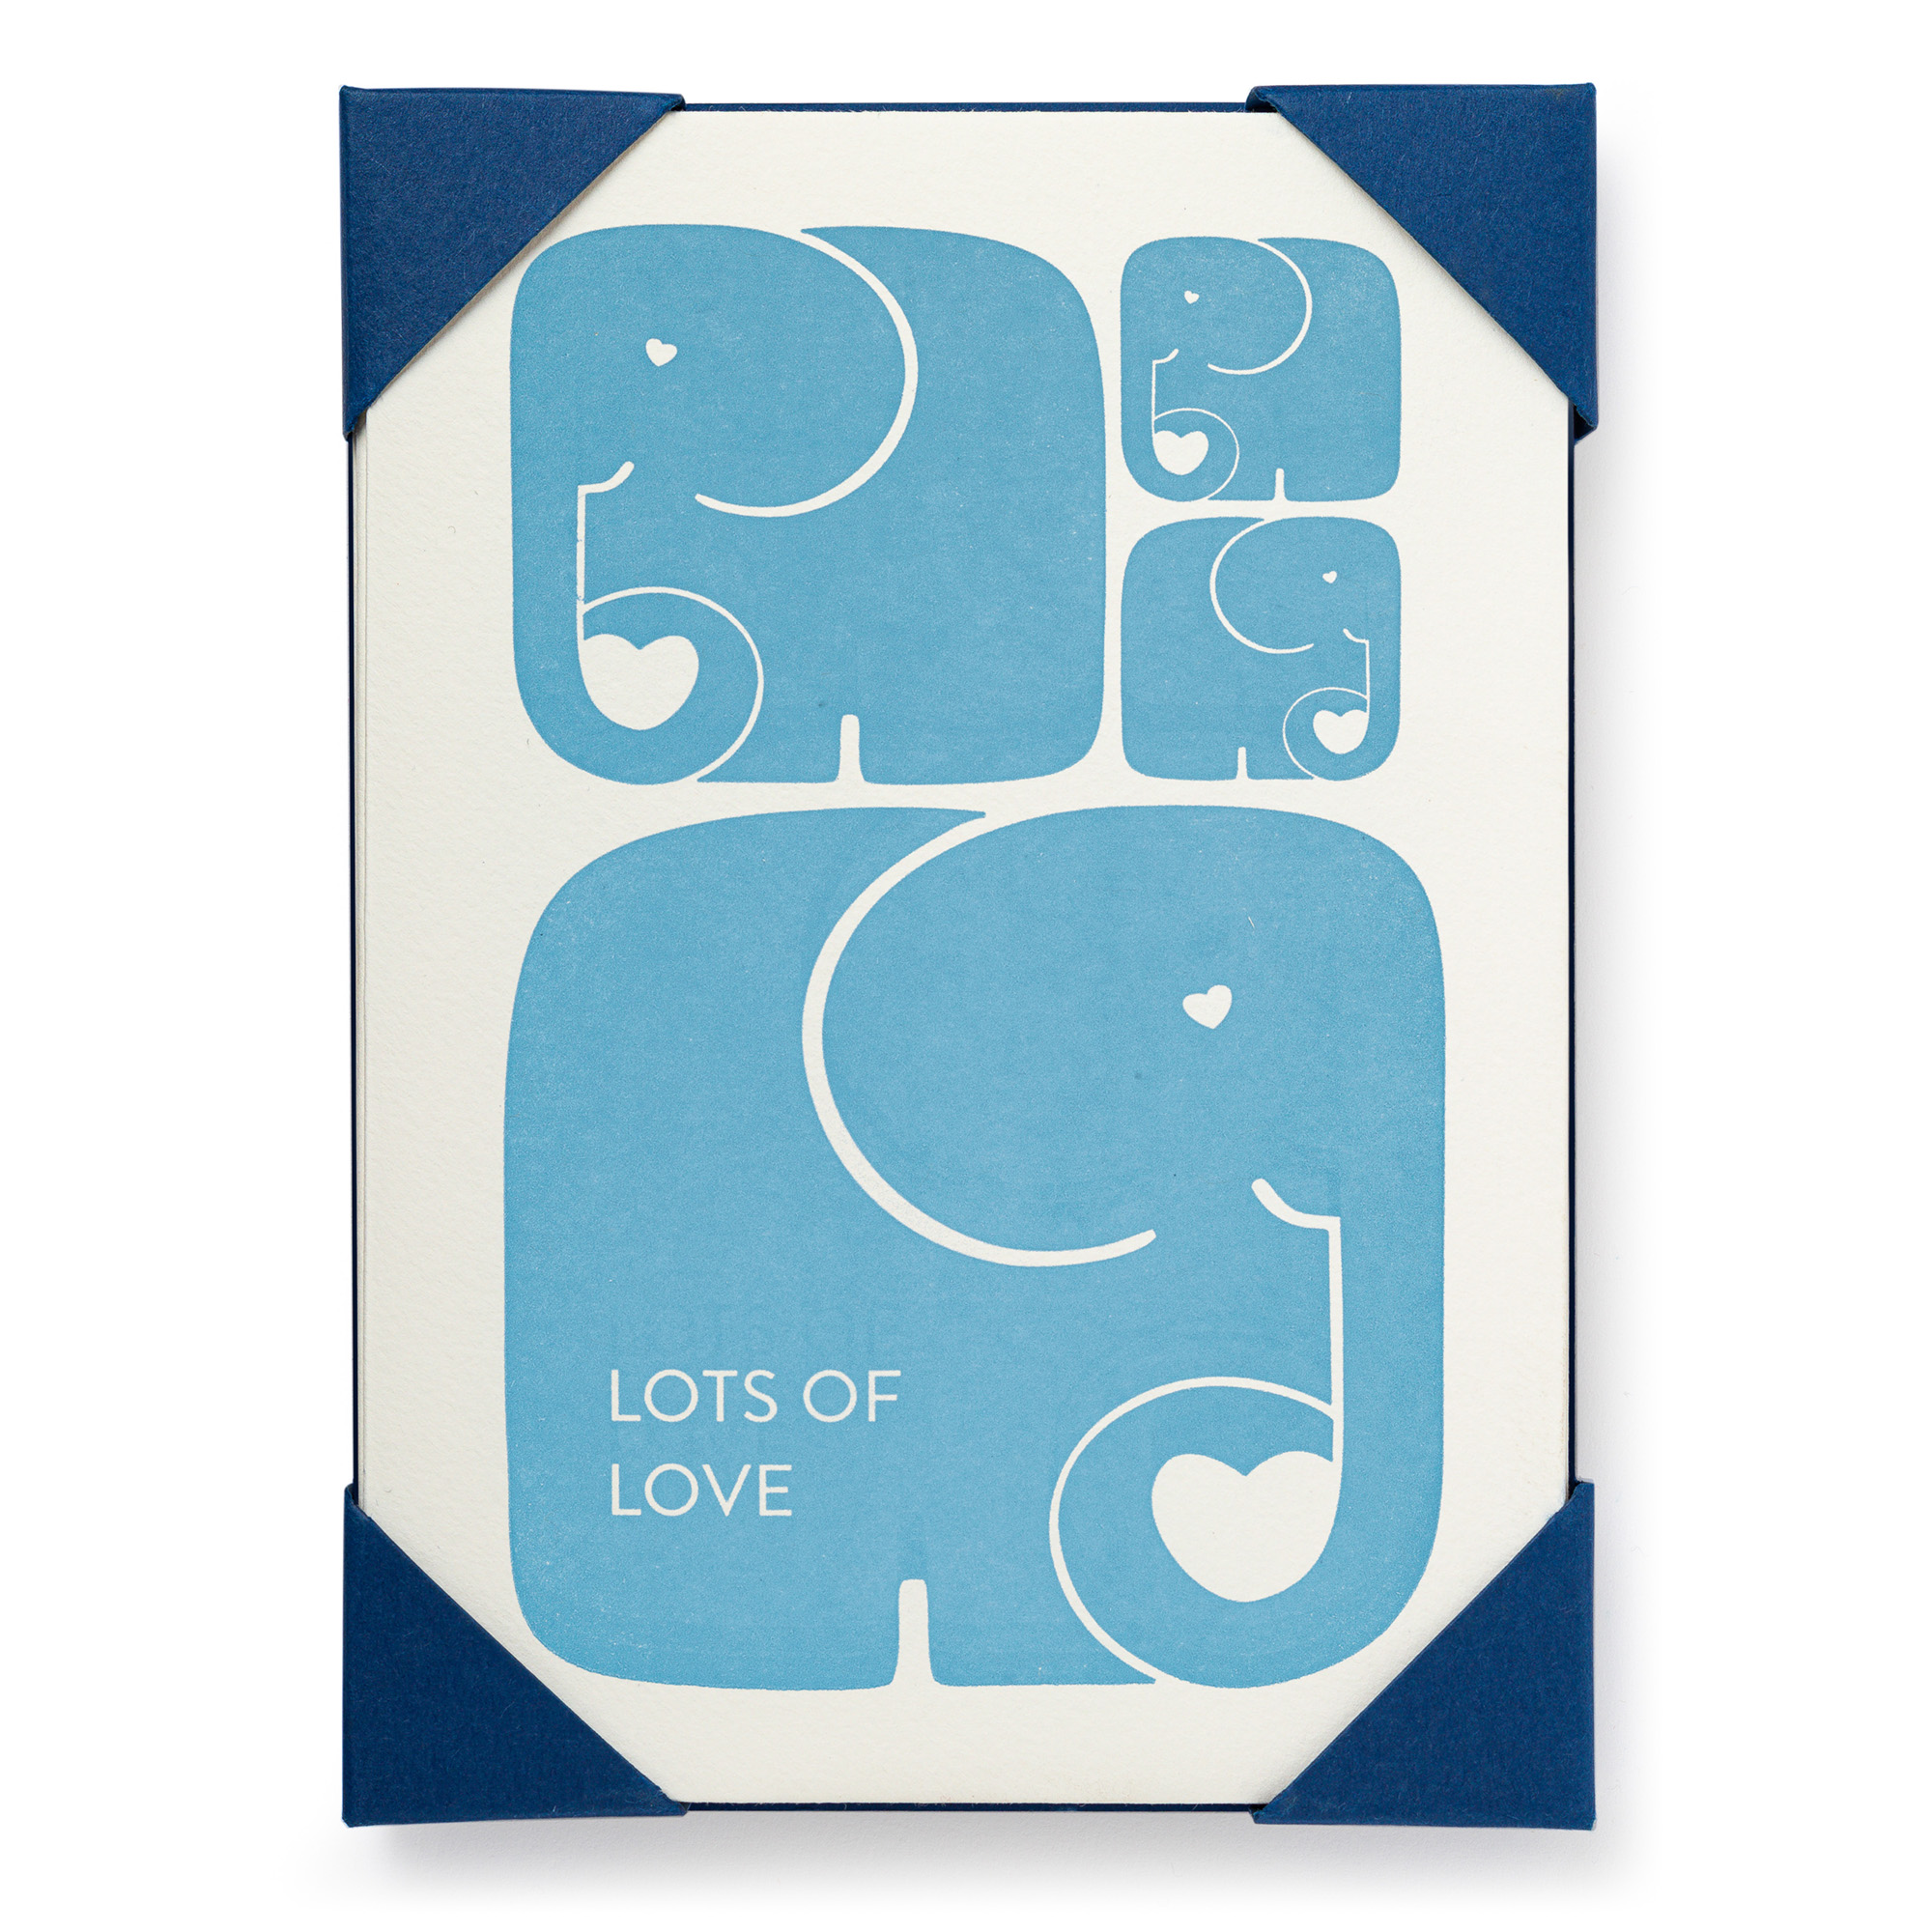 Lots of Love - Notelets Packs - Paula Hirst - from Archivist Gallery 